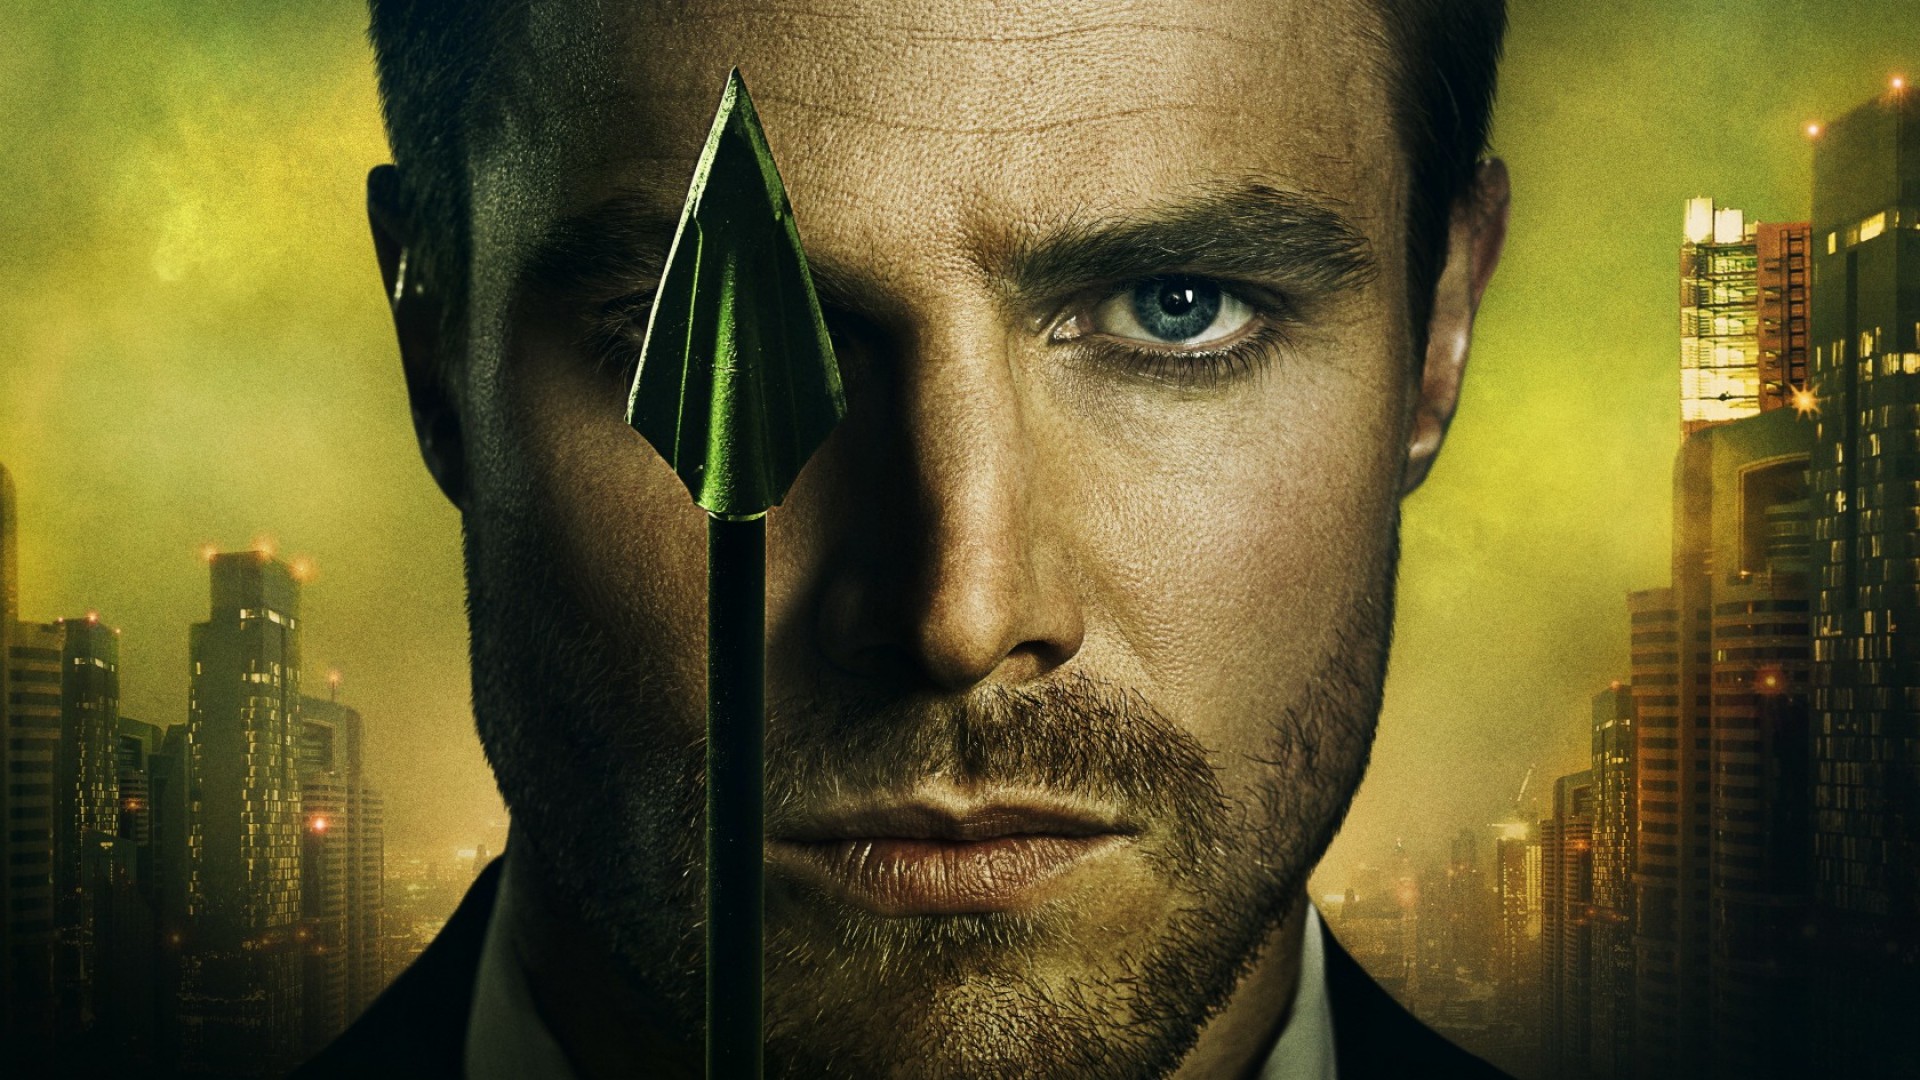 1920x1080 HD Wallpaper and background photos of Arrow for fans of Arrow images.